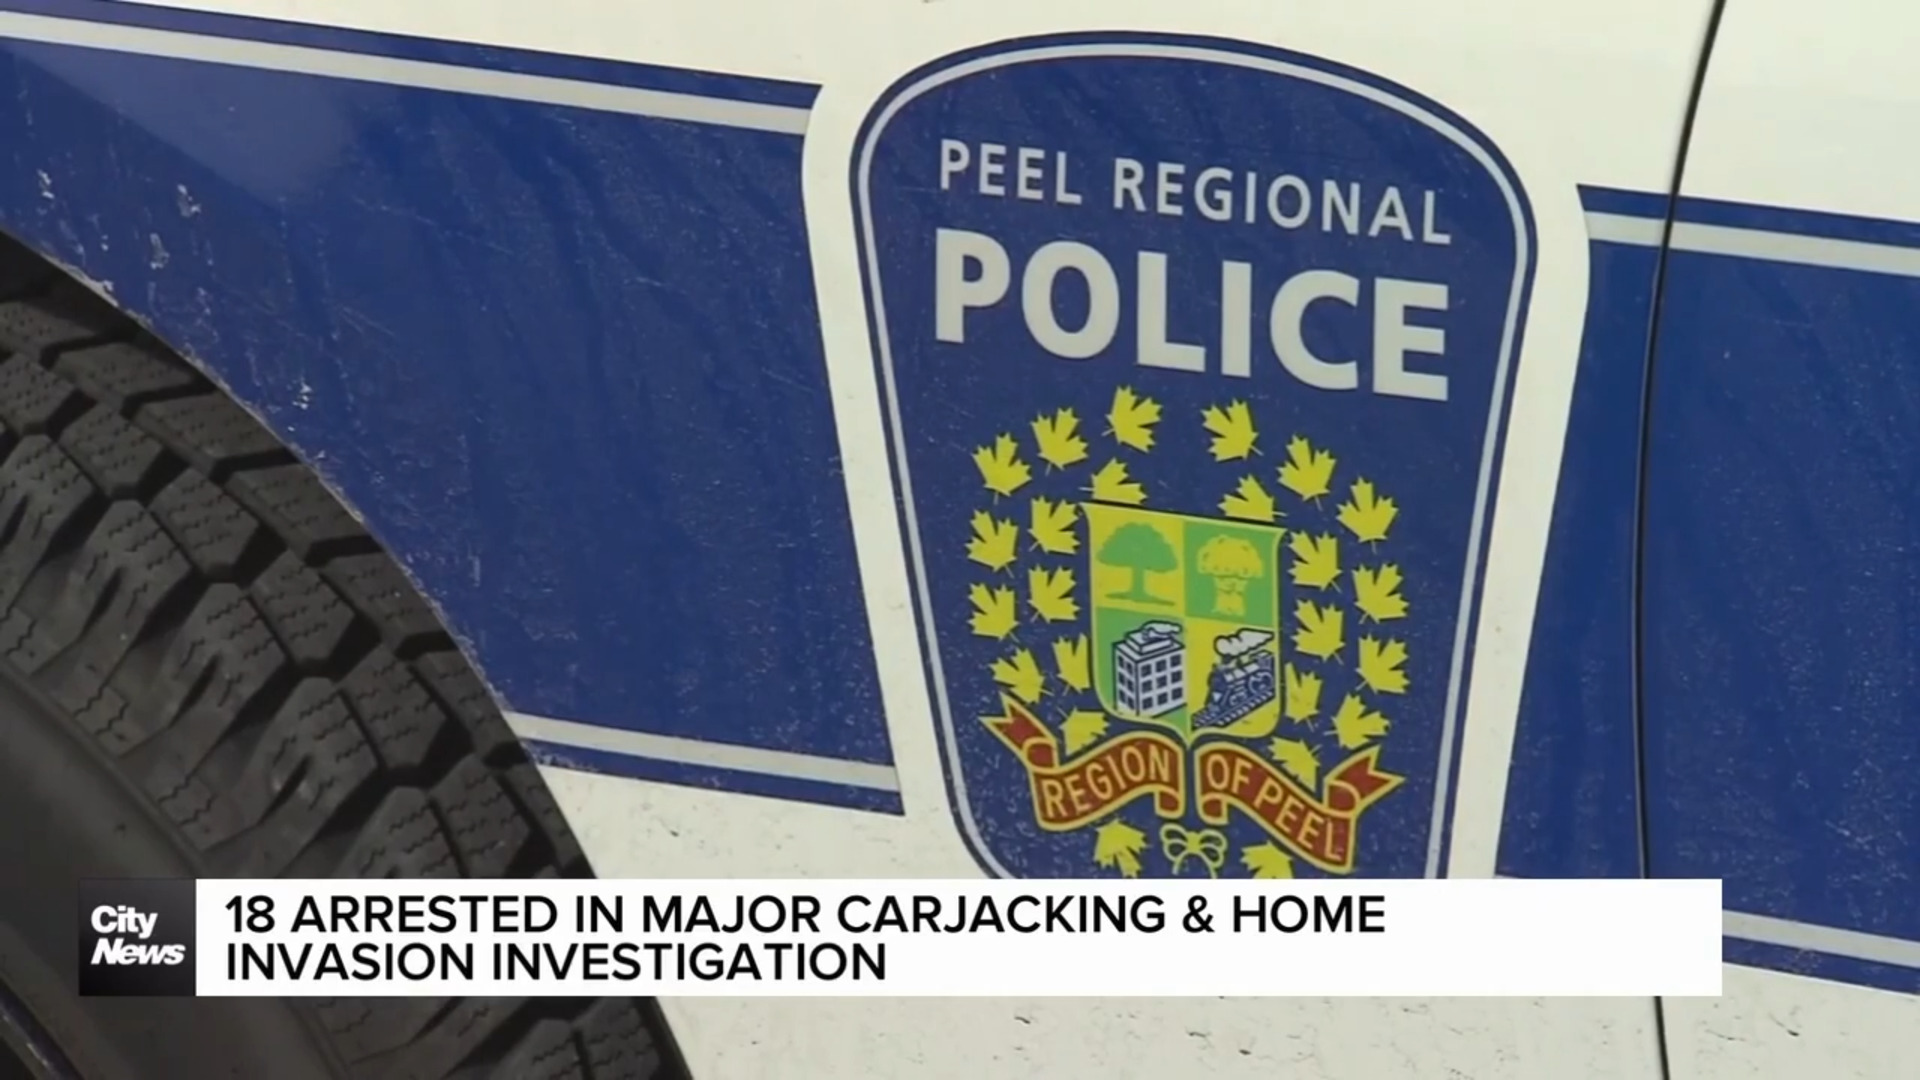 Peel Police arrest 18 suspects in major carjacking and home invasion investigation